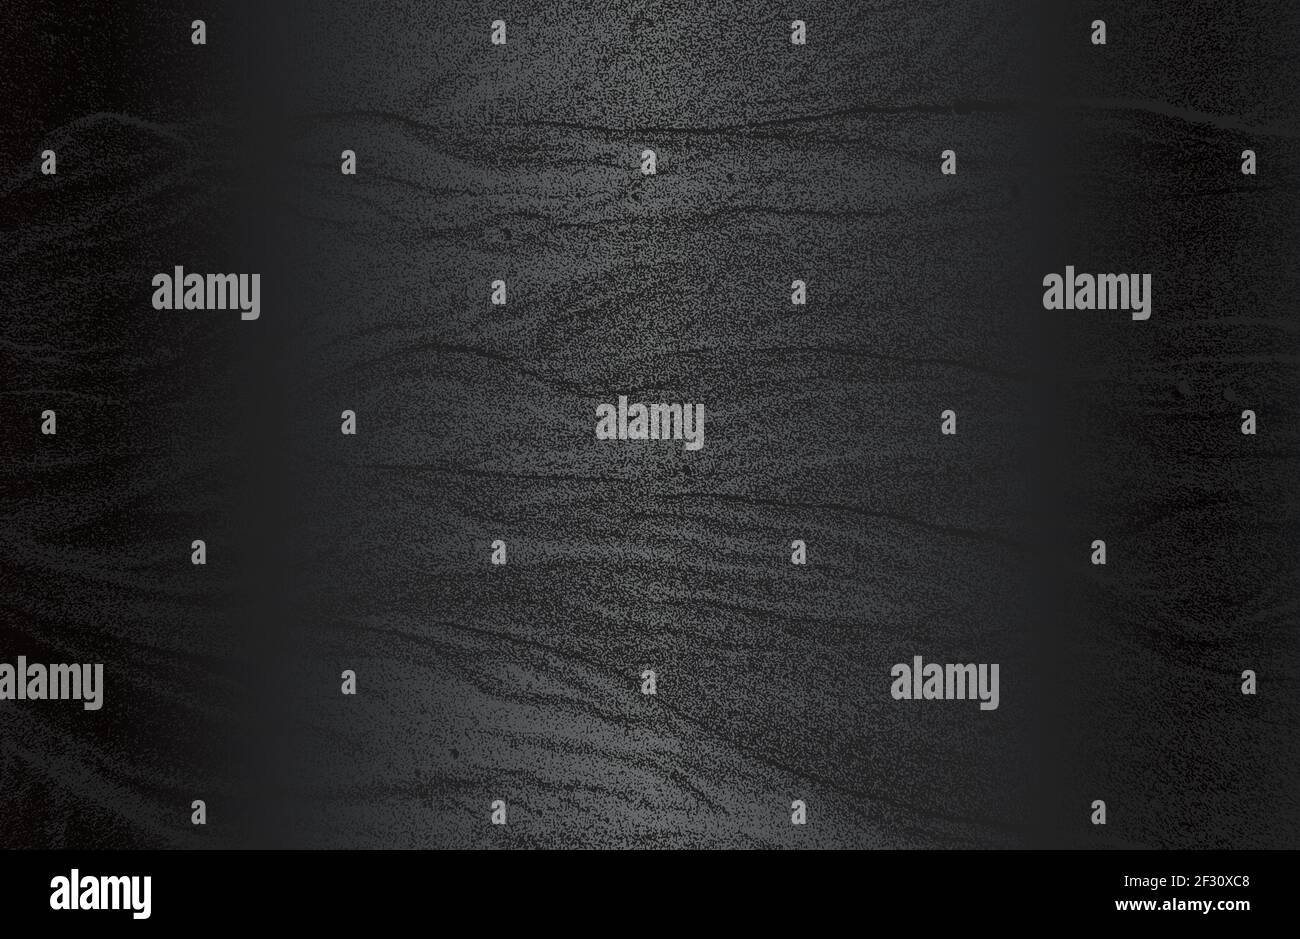 Luxury black metal gradient background with distressed metal plate texture. Vector illustration Stock Vector